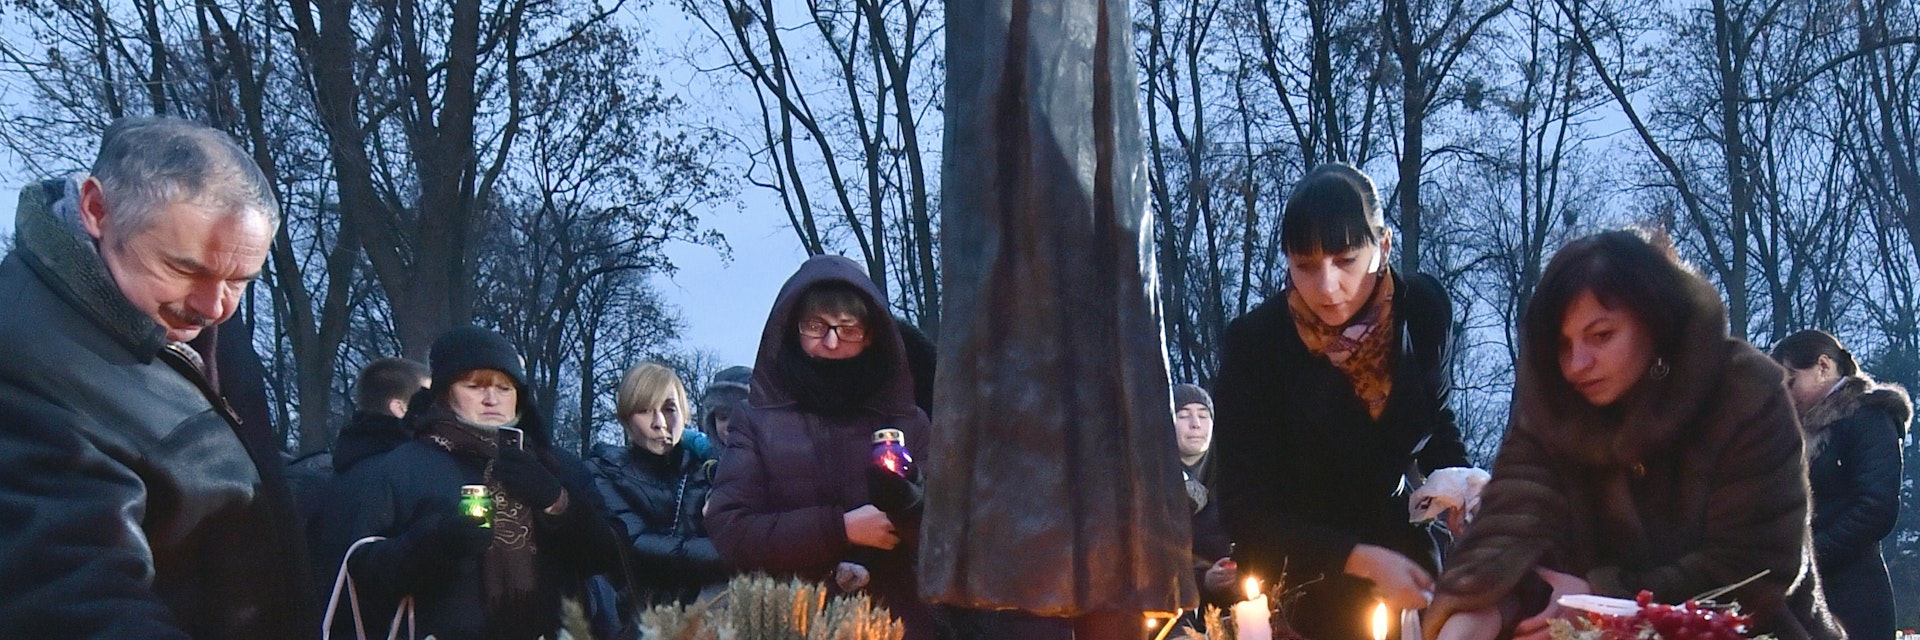 Ukrainians place candles in memory of the victims of the Holodomor famine during a ceremony at the Holodomor memorial in Kiev on November 22, 2014. Ukraine marked 81 years since the Stalin-era Holodomor famine, one of the darkest pages in its entire history that left millions dead and which is regarded by many as a genocide. The 1932-33 famine took place as harvests dwindled and Soviet leader Josef Stalin's police enforced the brutal policy of collectivising agriculture by requisitioning grain and other foodstuffs. AFP PHOTO/ SERGEI SUPINSKY        (Photo credit should read SERGEI SUPINSKY/AFP/Getty Images)